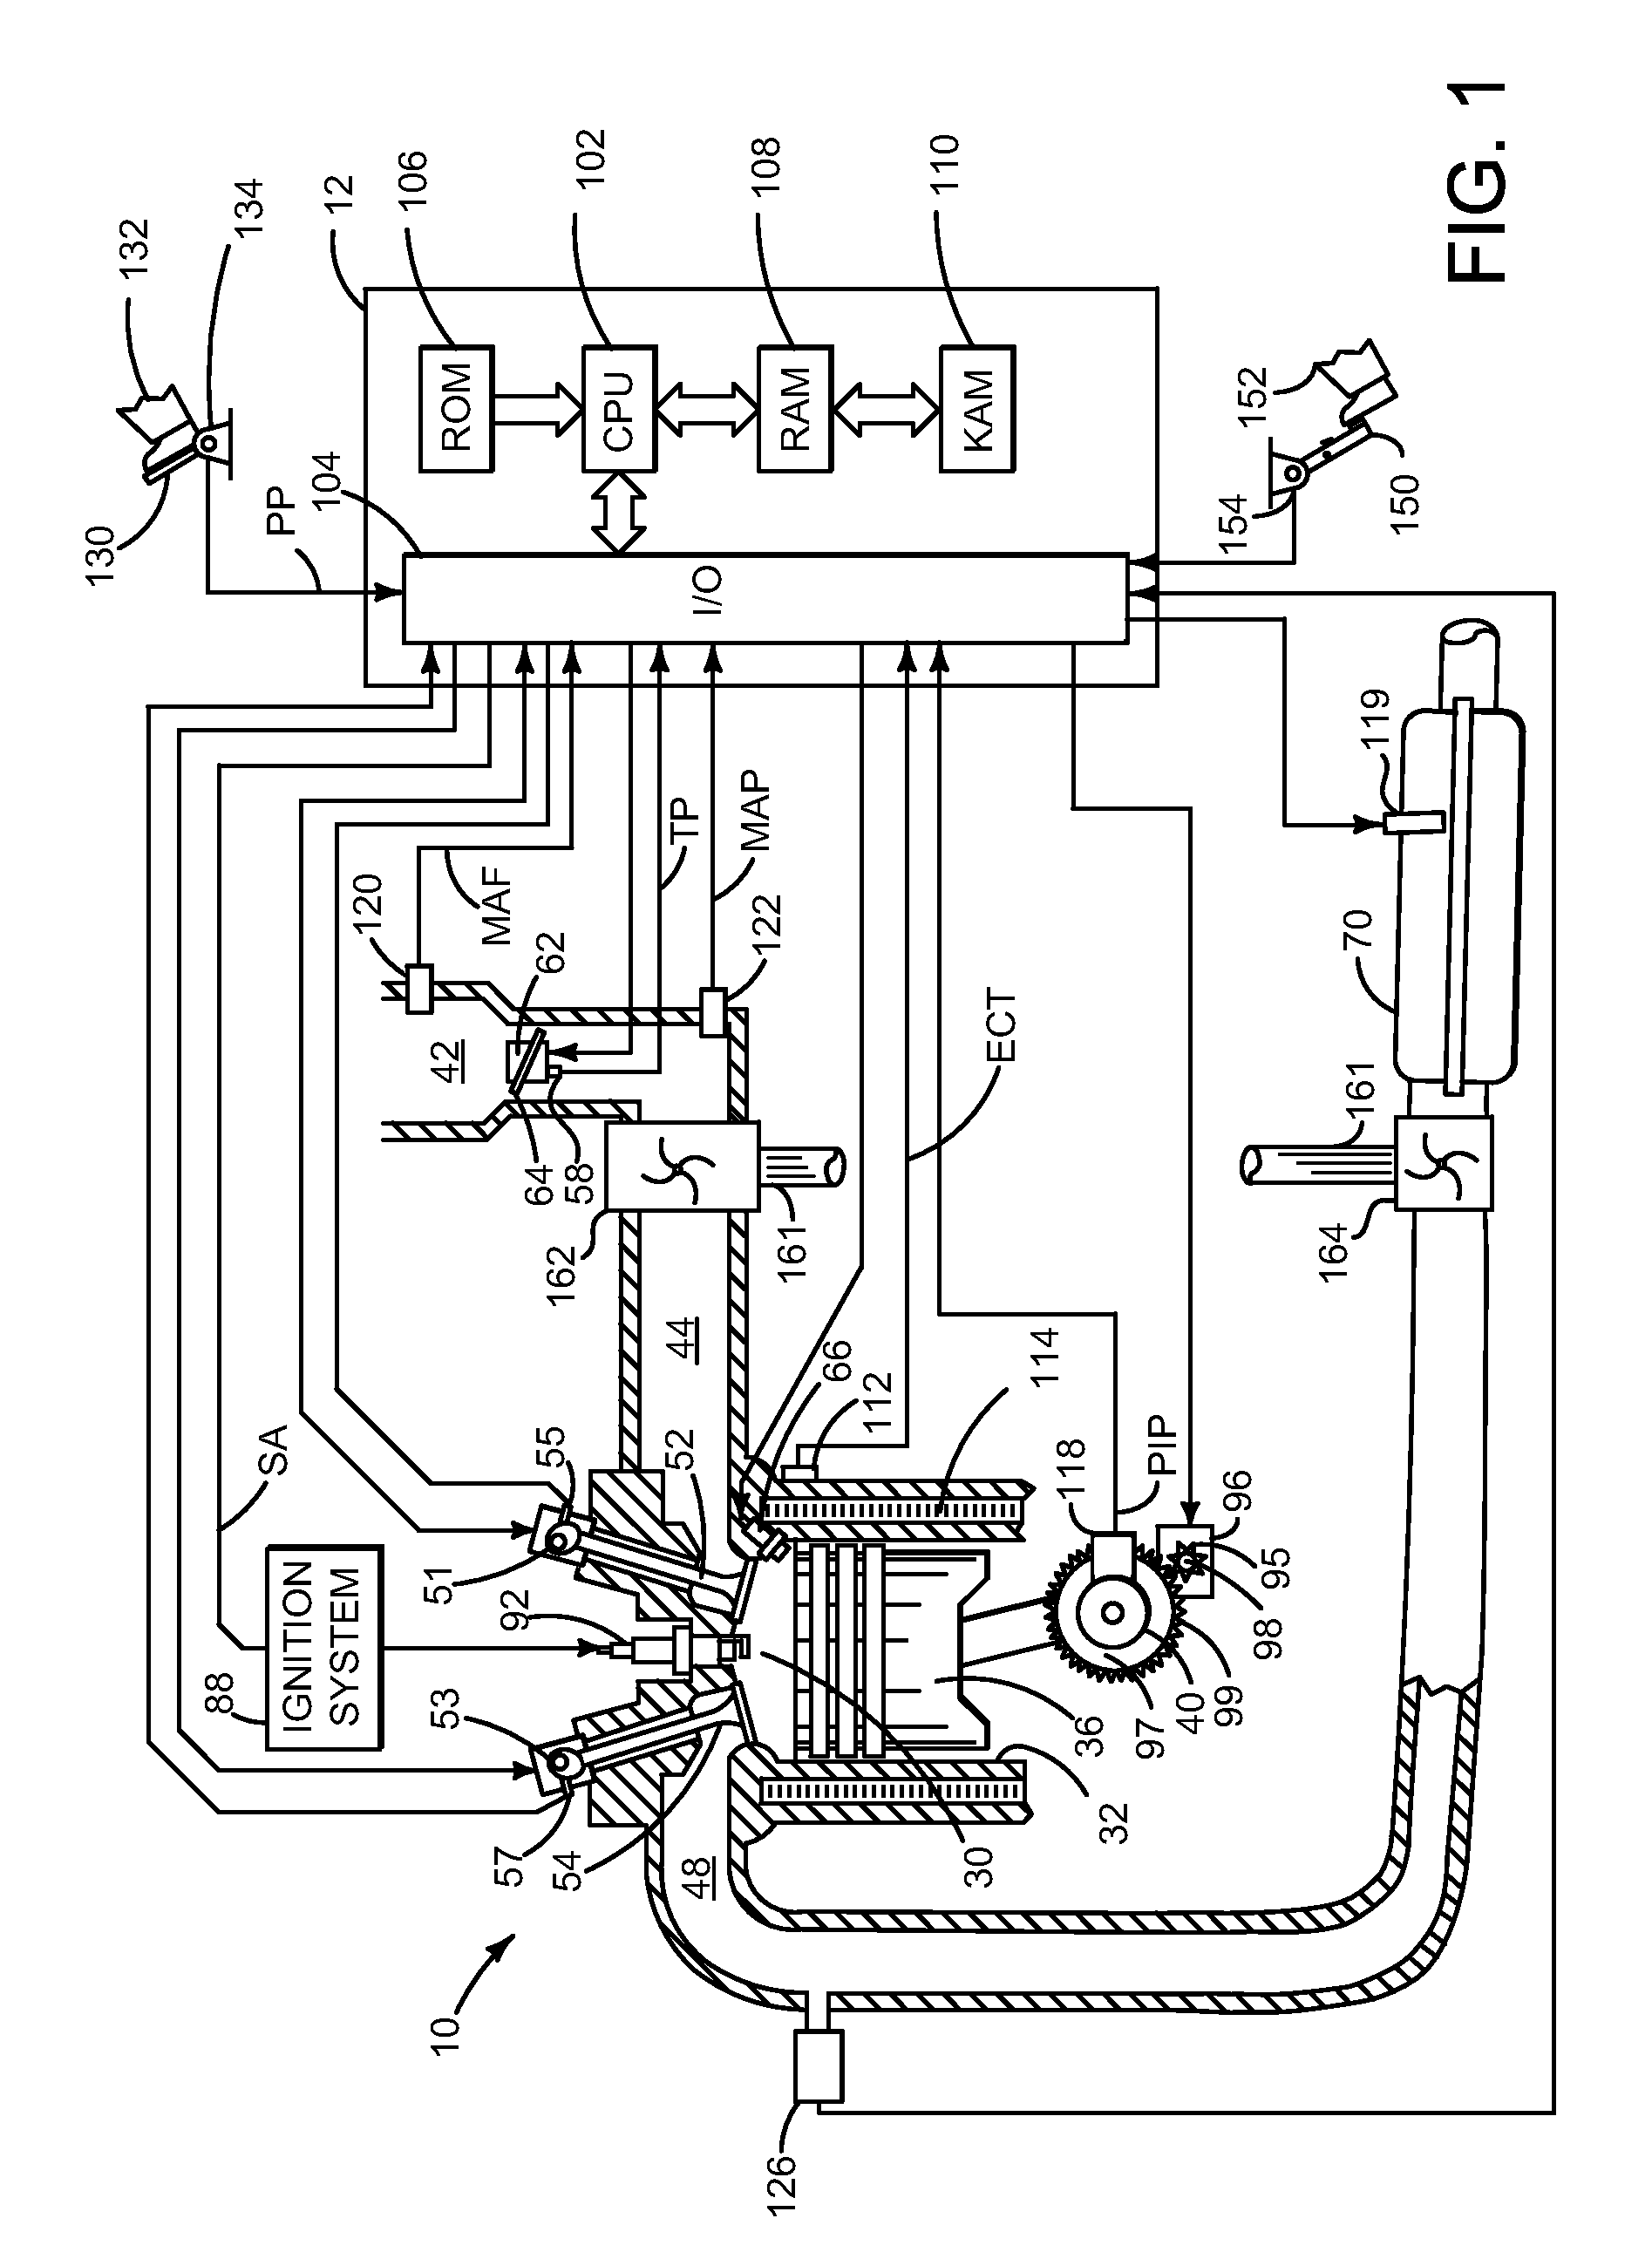 Methods and systems for improving hybrid vehicle performance consistency